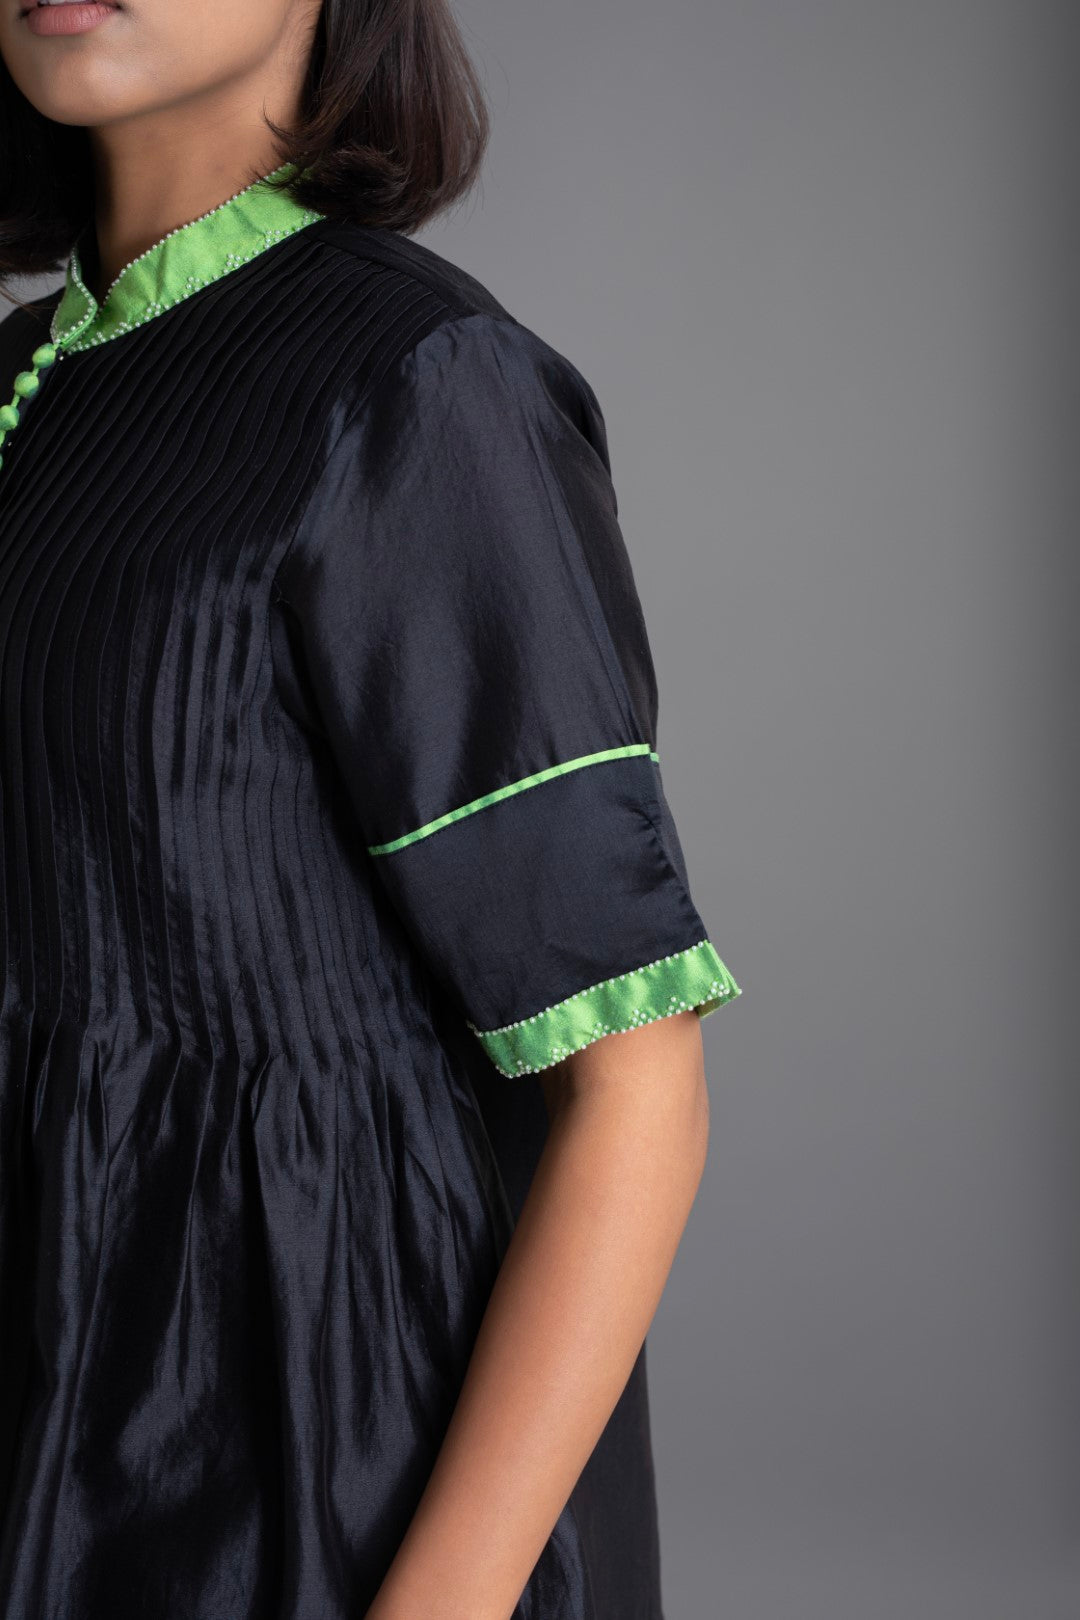 Obsidian Top with Lime collar and cuff